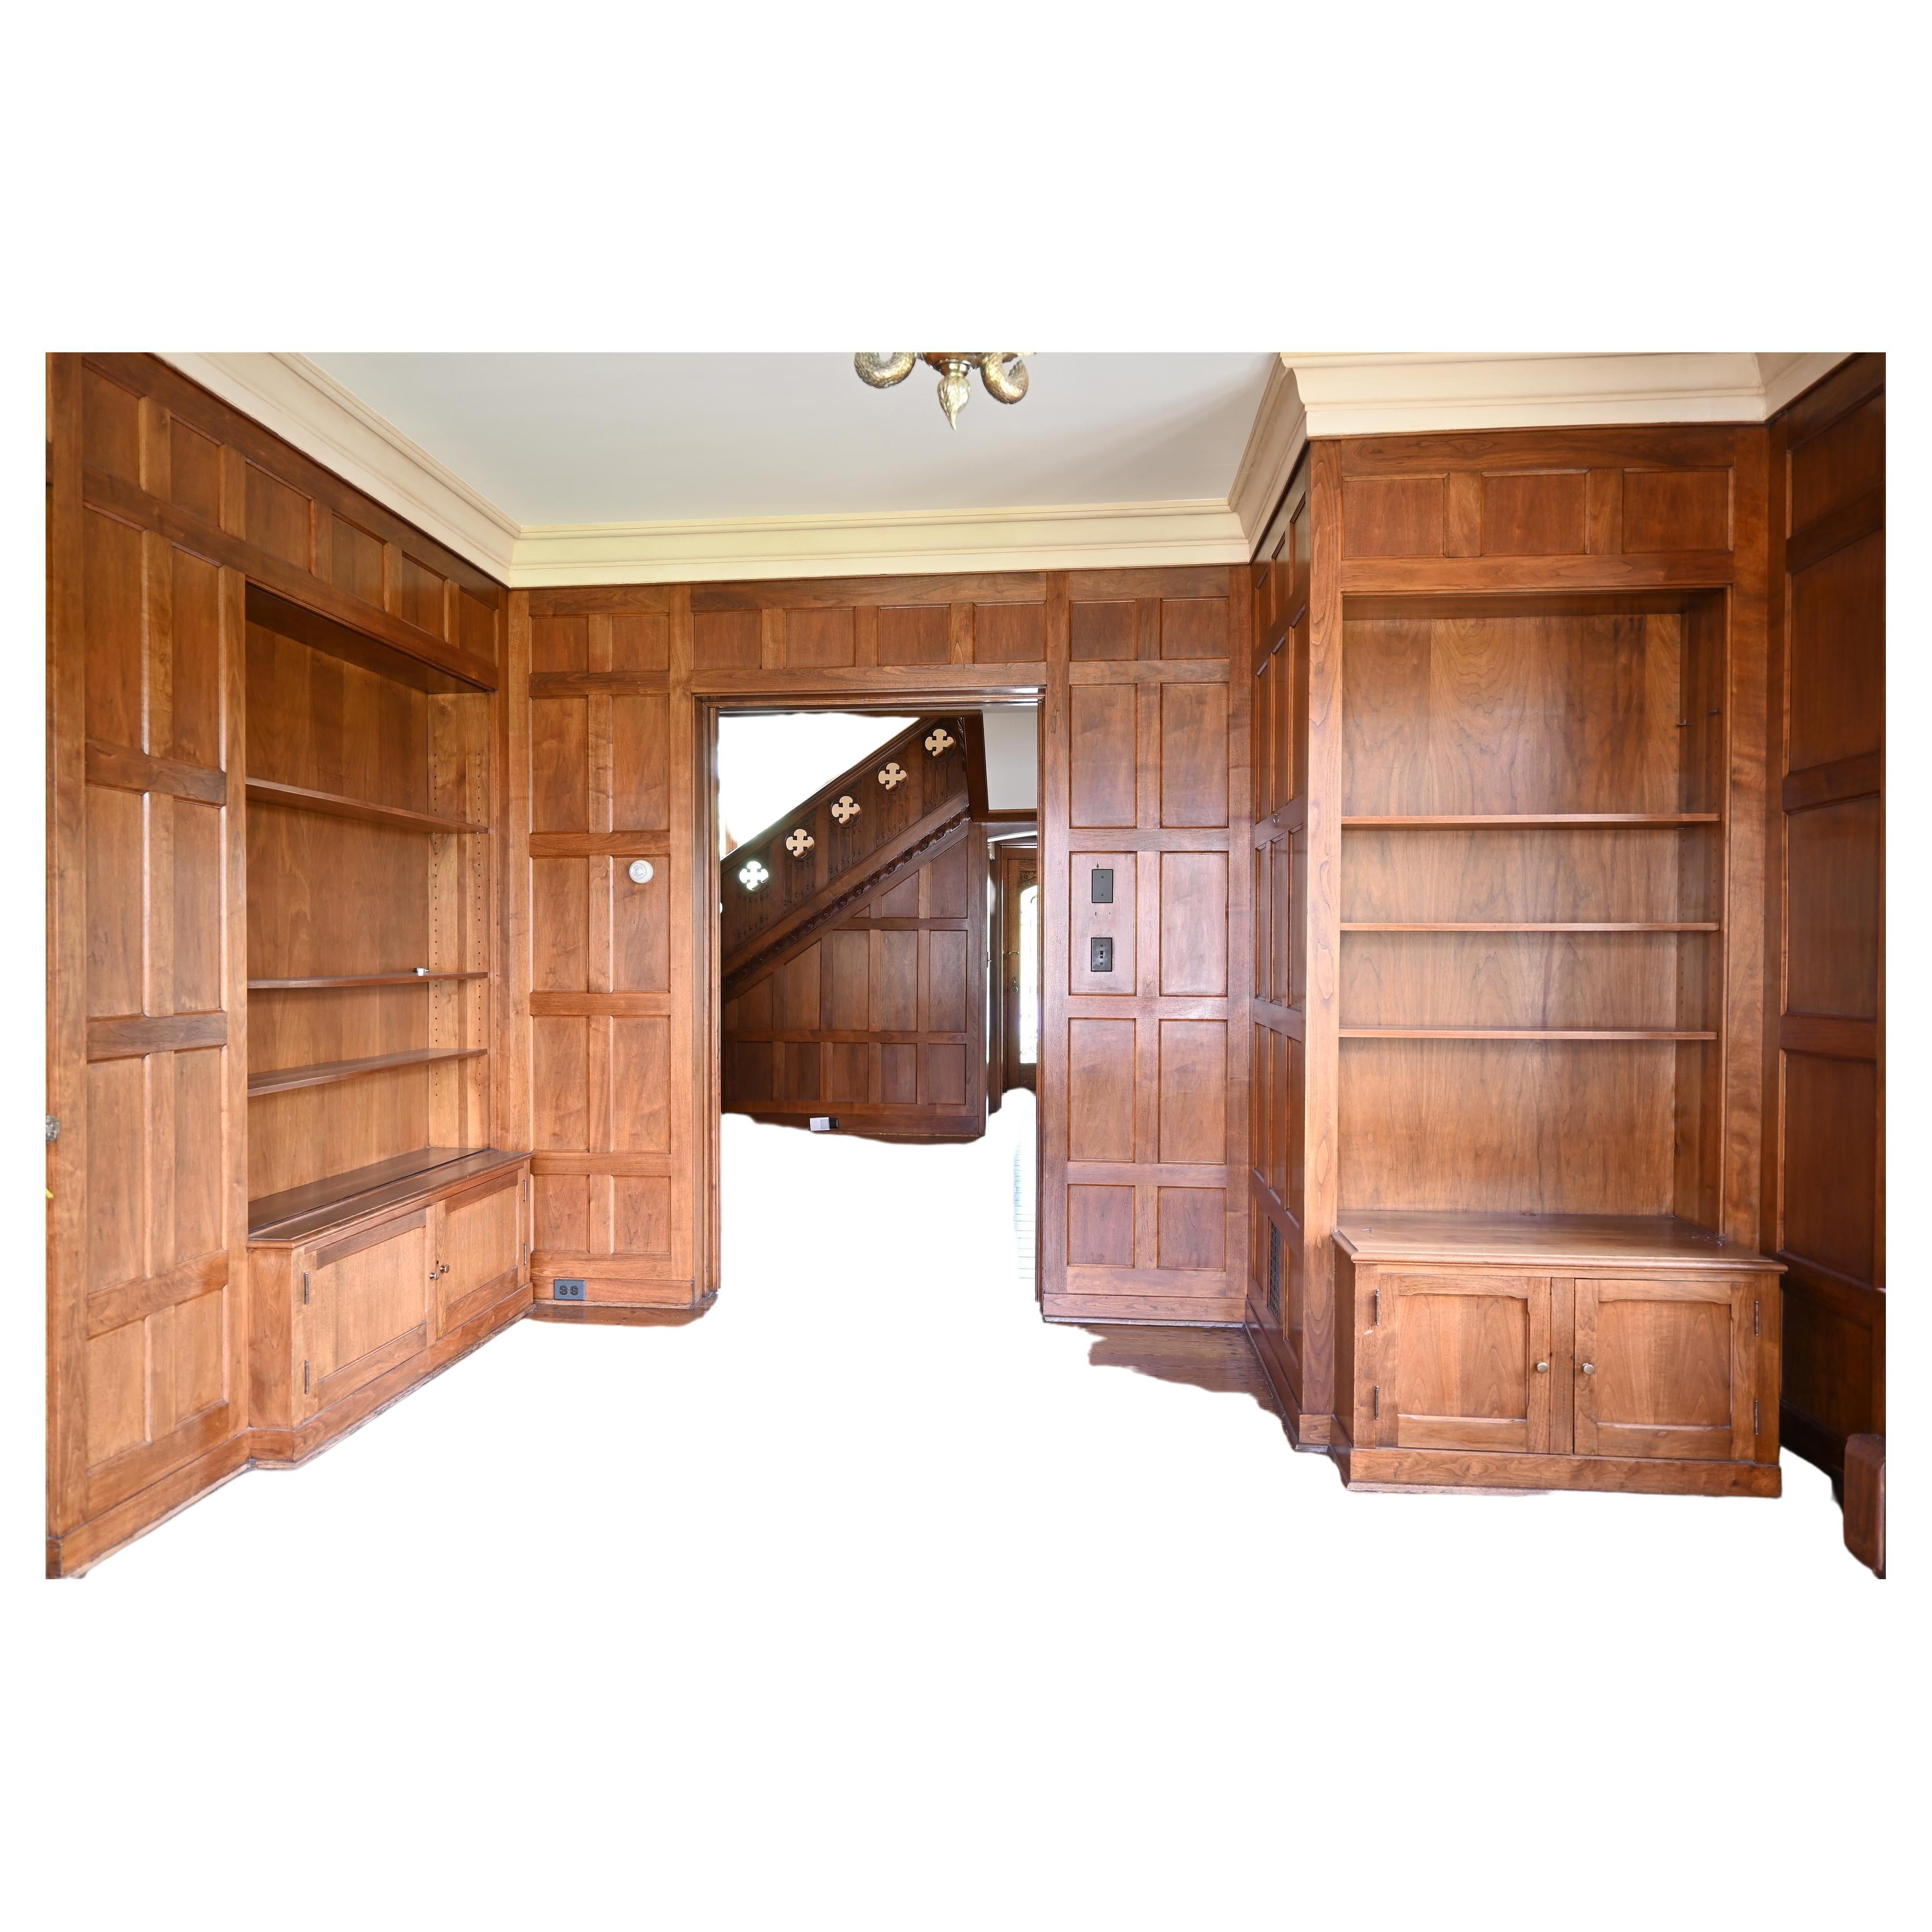 Butternut 'White Walnut' 1929 Paneled Library with Bookcases & Doors Complete For Sale